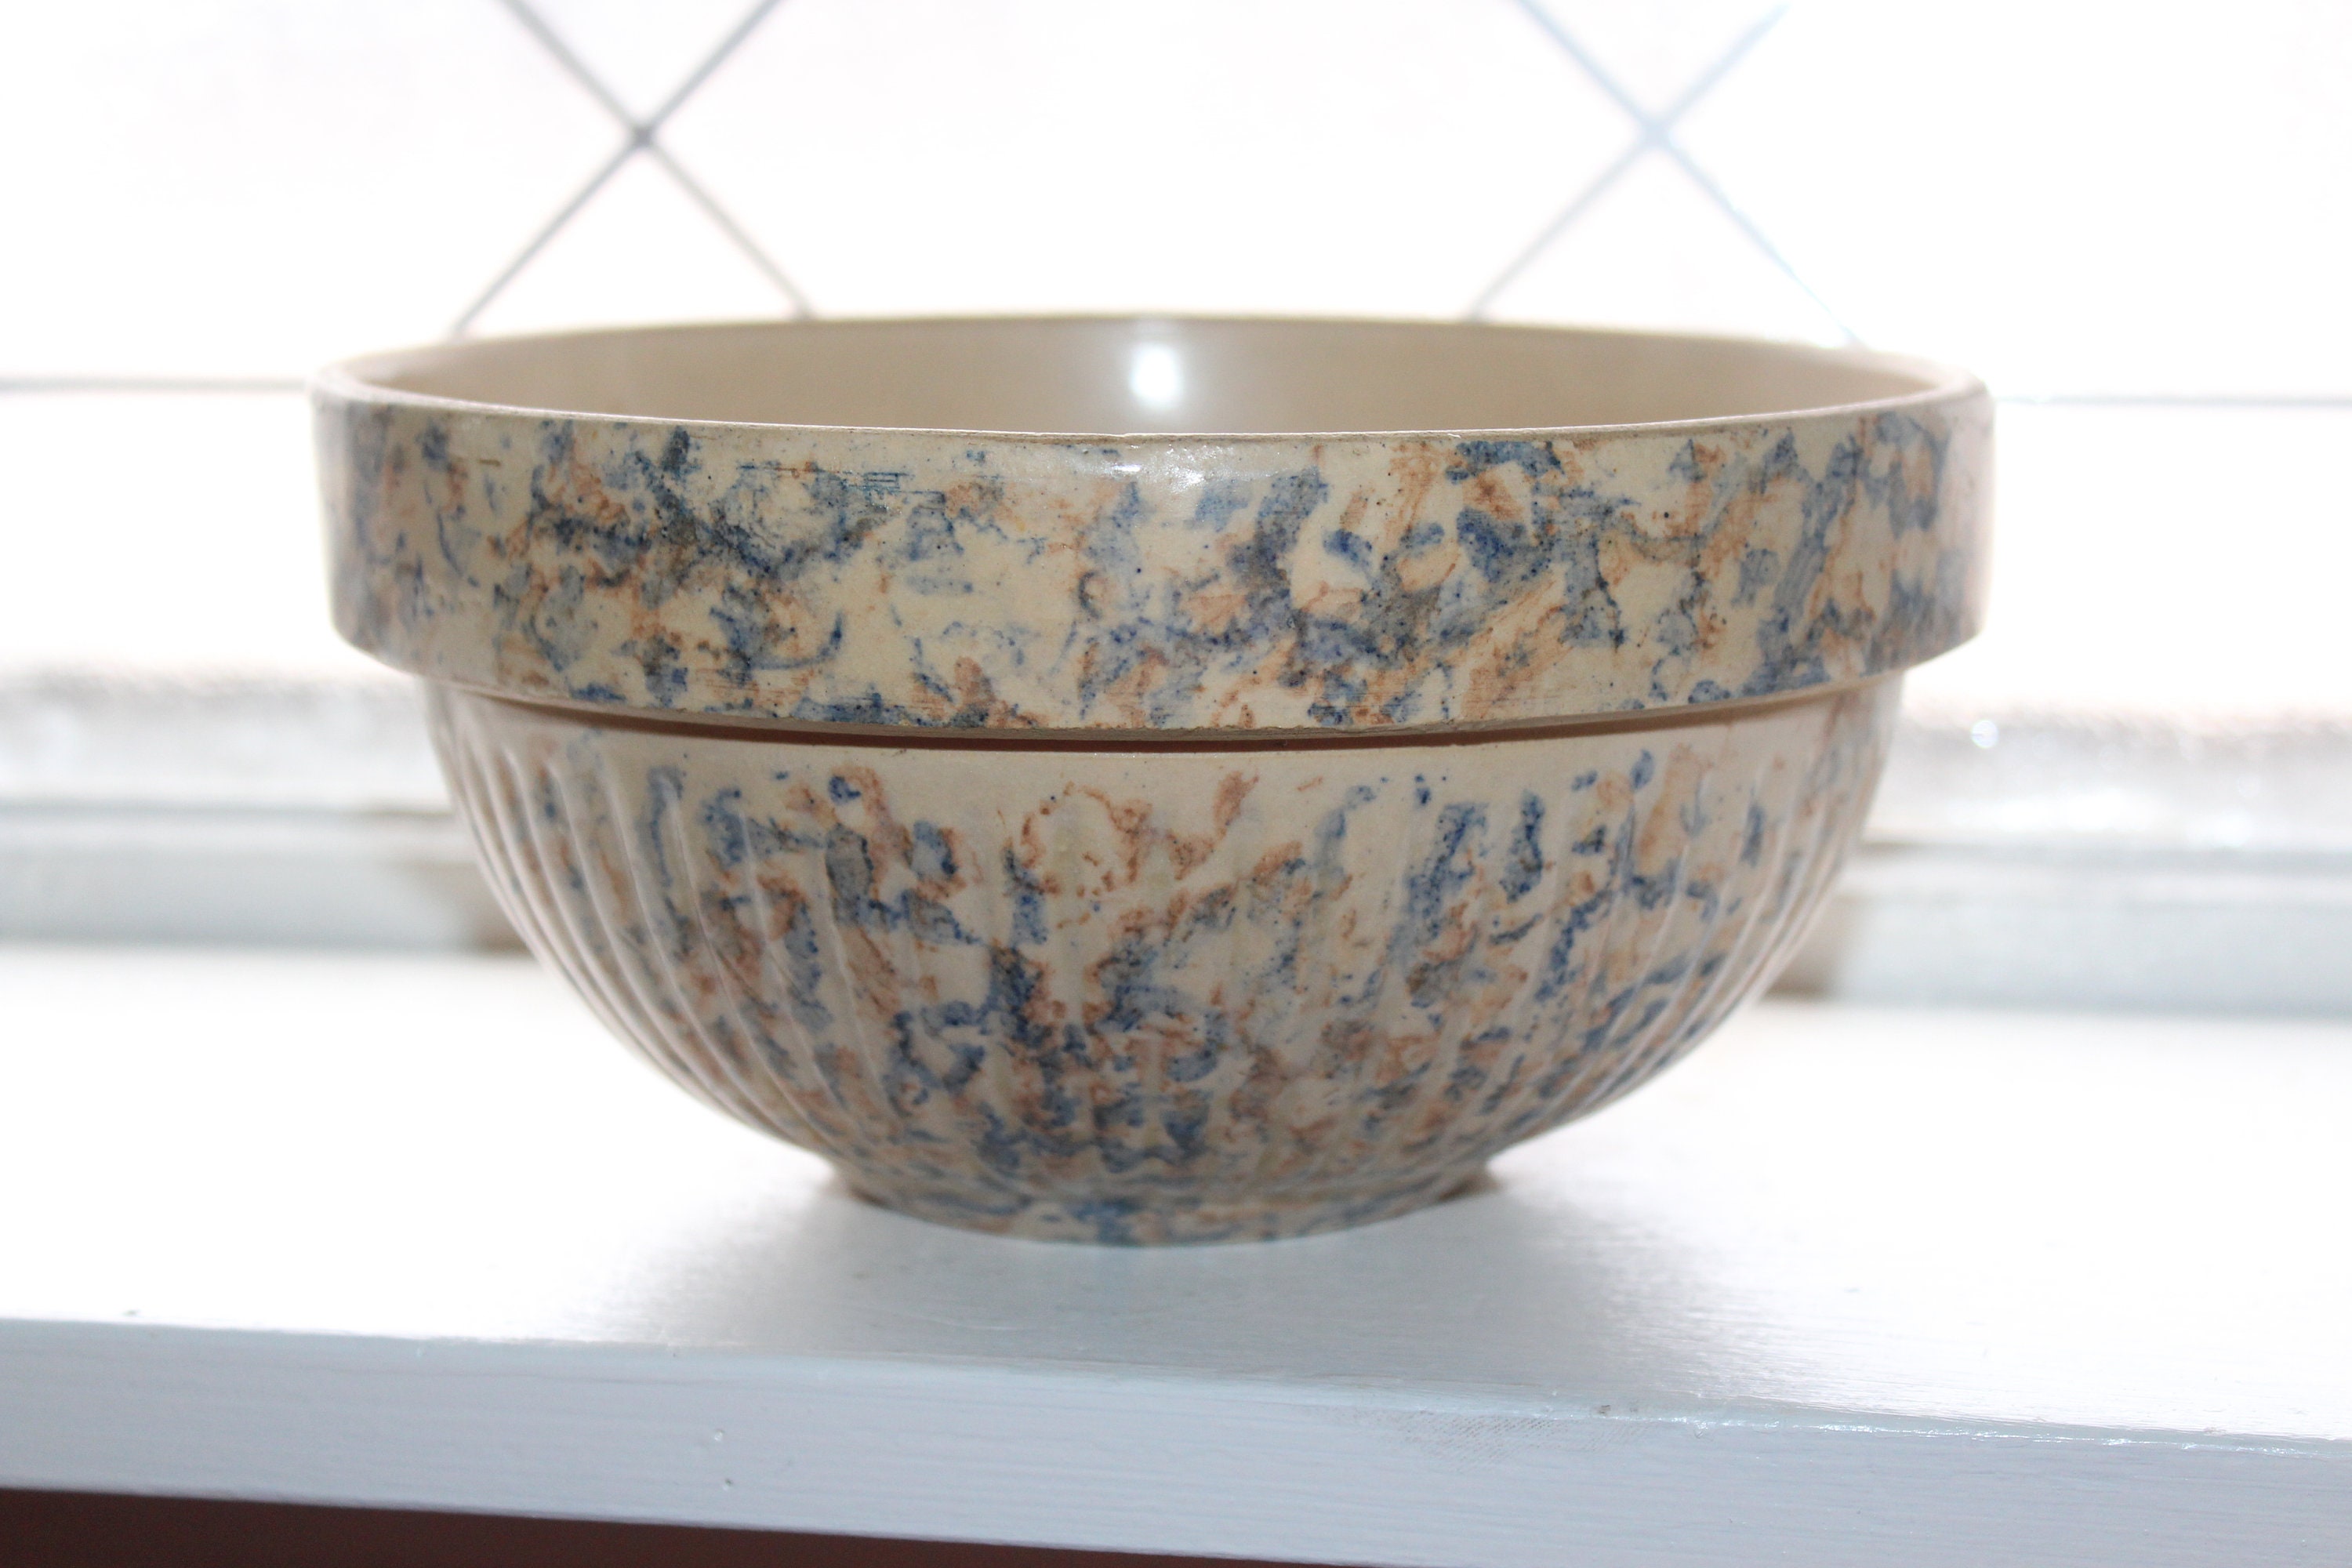 19th C Sponge Ware Giant Mixing Bowl For Sale at 1stDibs